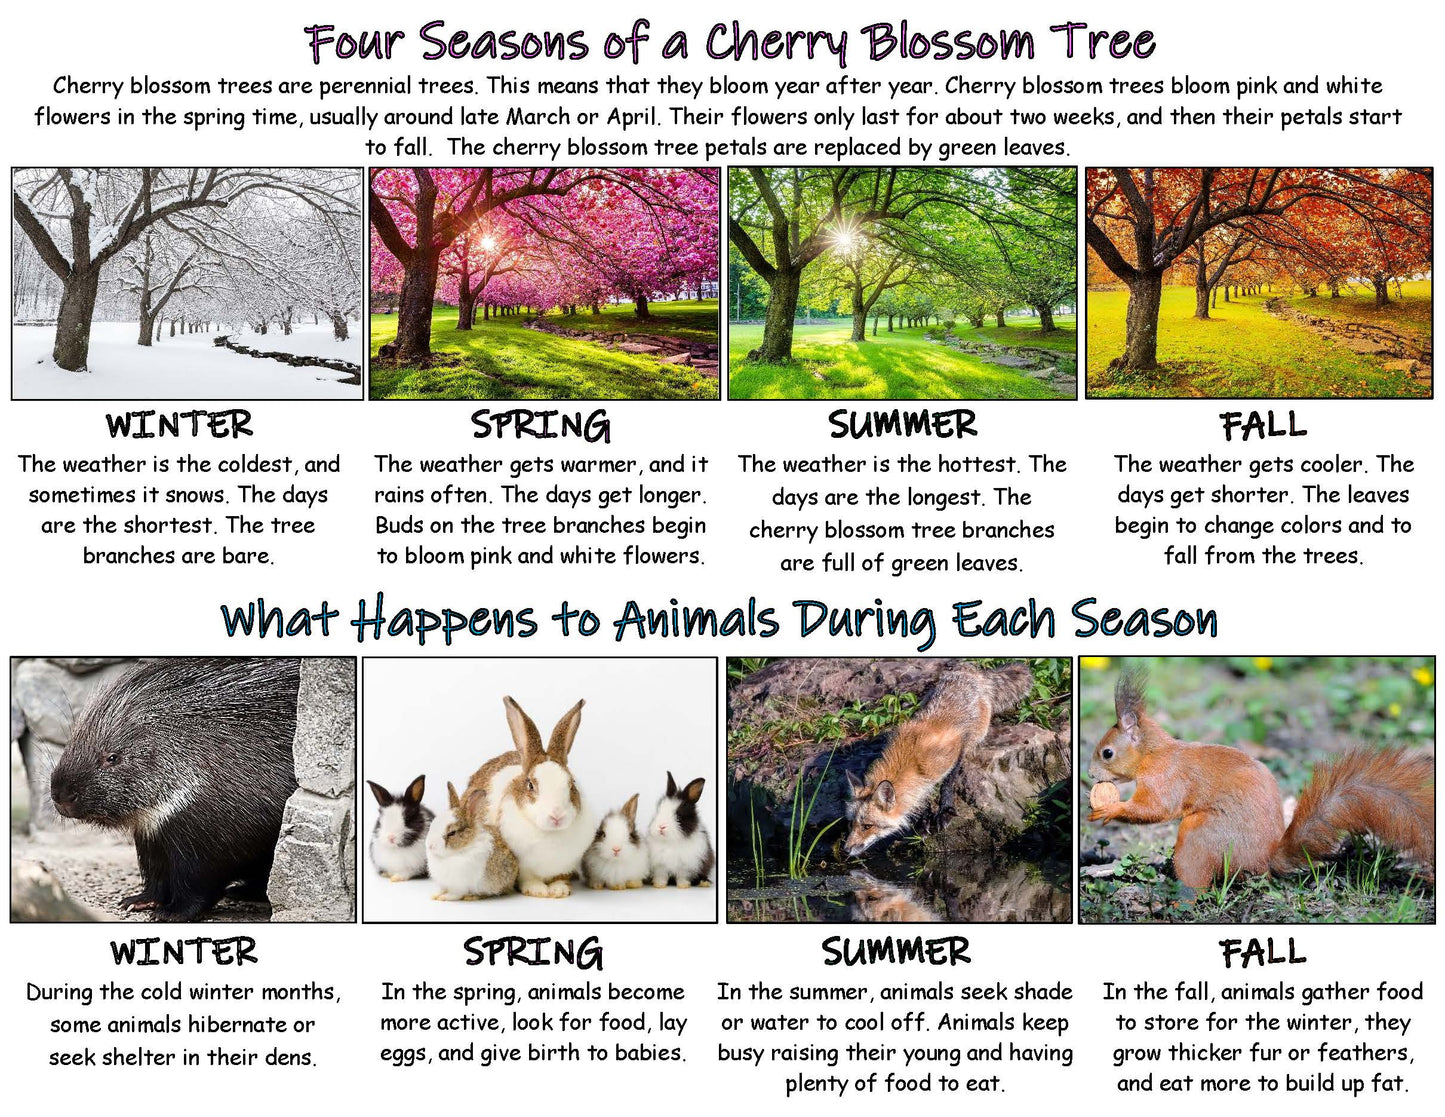 Facts about cherry blossom tree